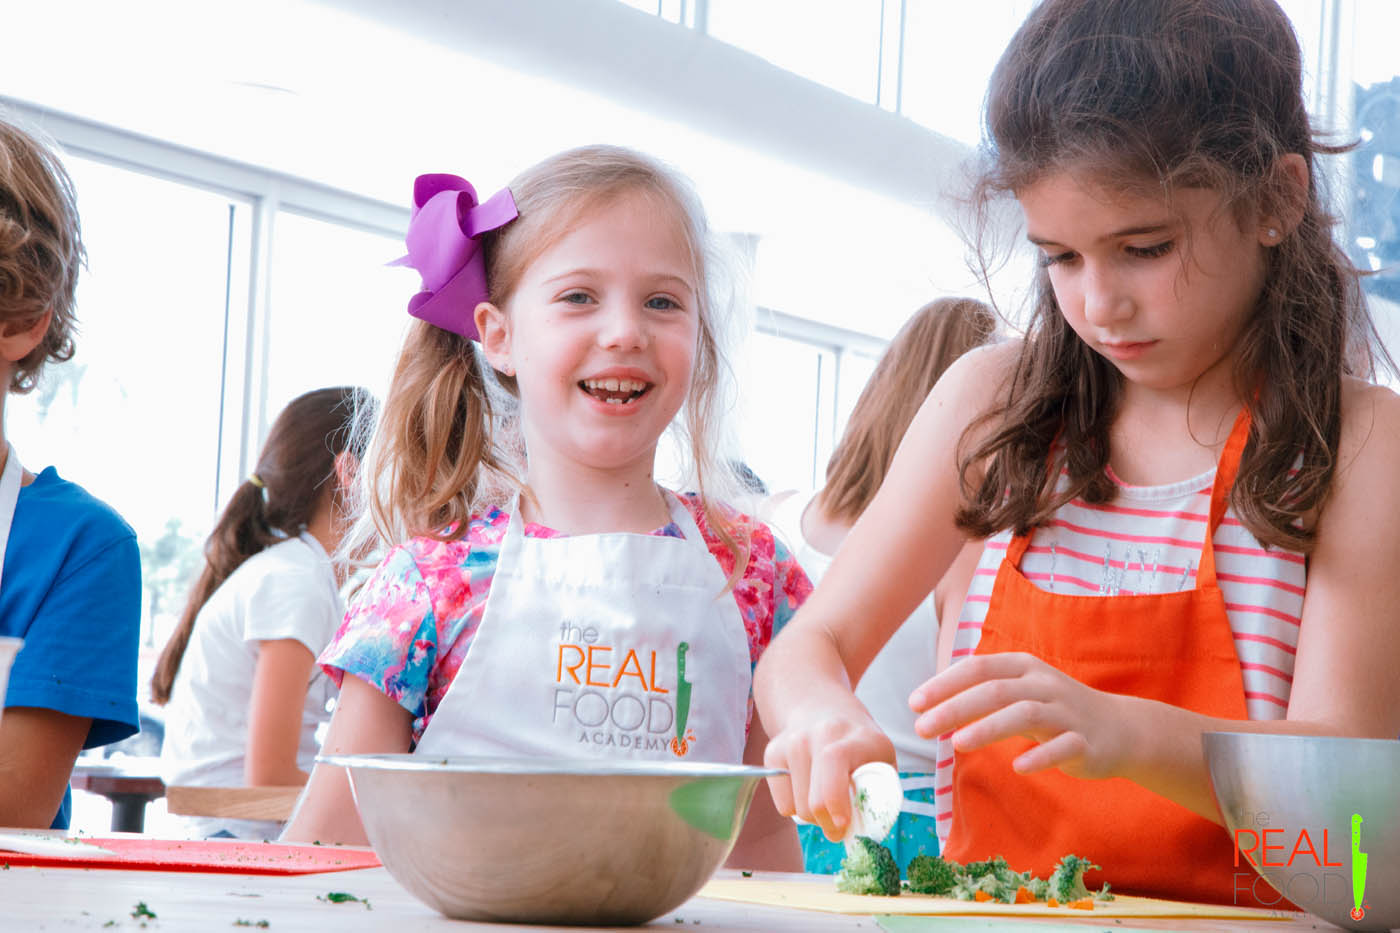 The Real Food Academy - Fun Kids and Teens Cooking Classes. Real Food Academy